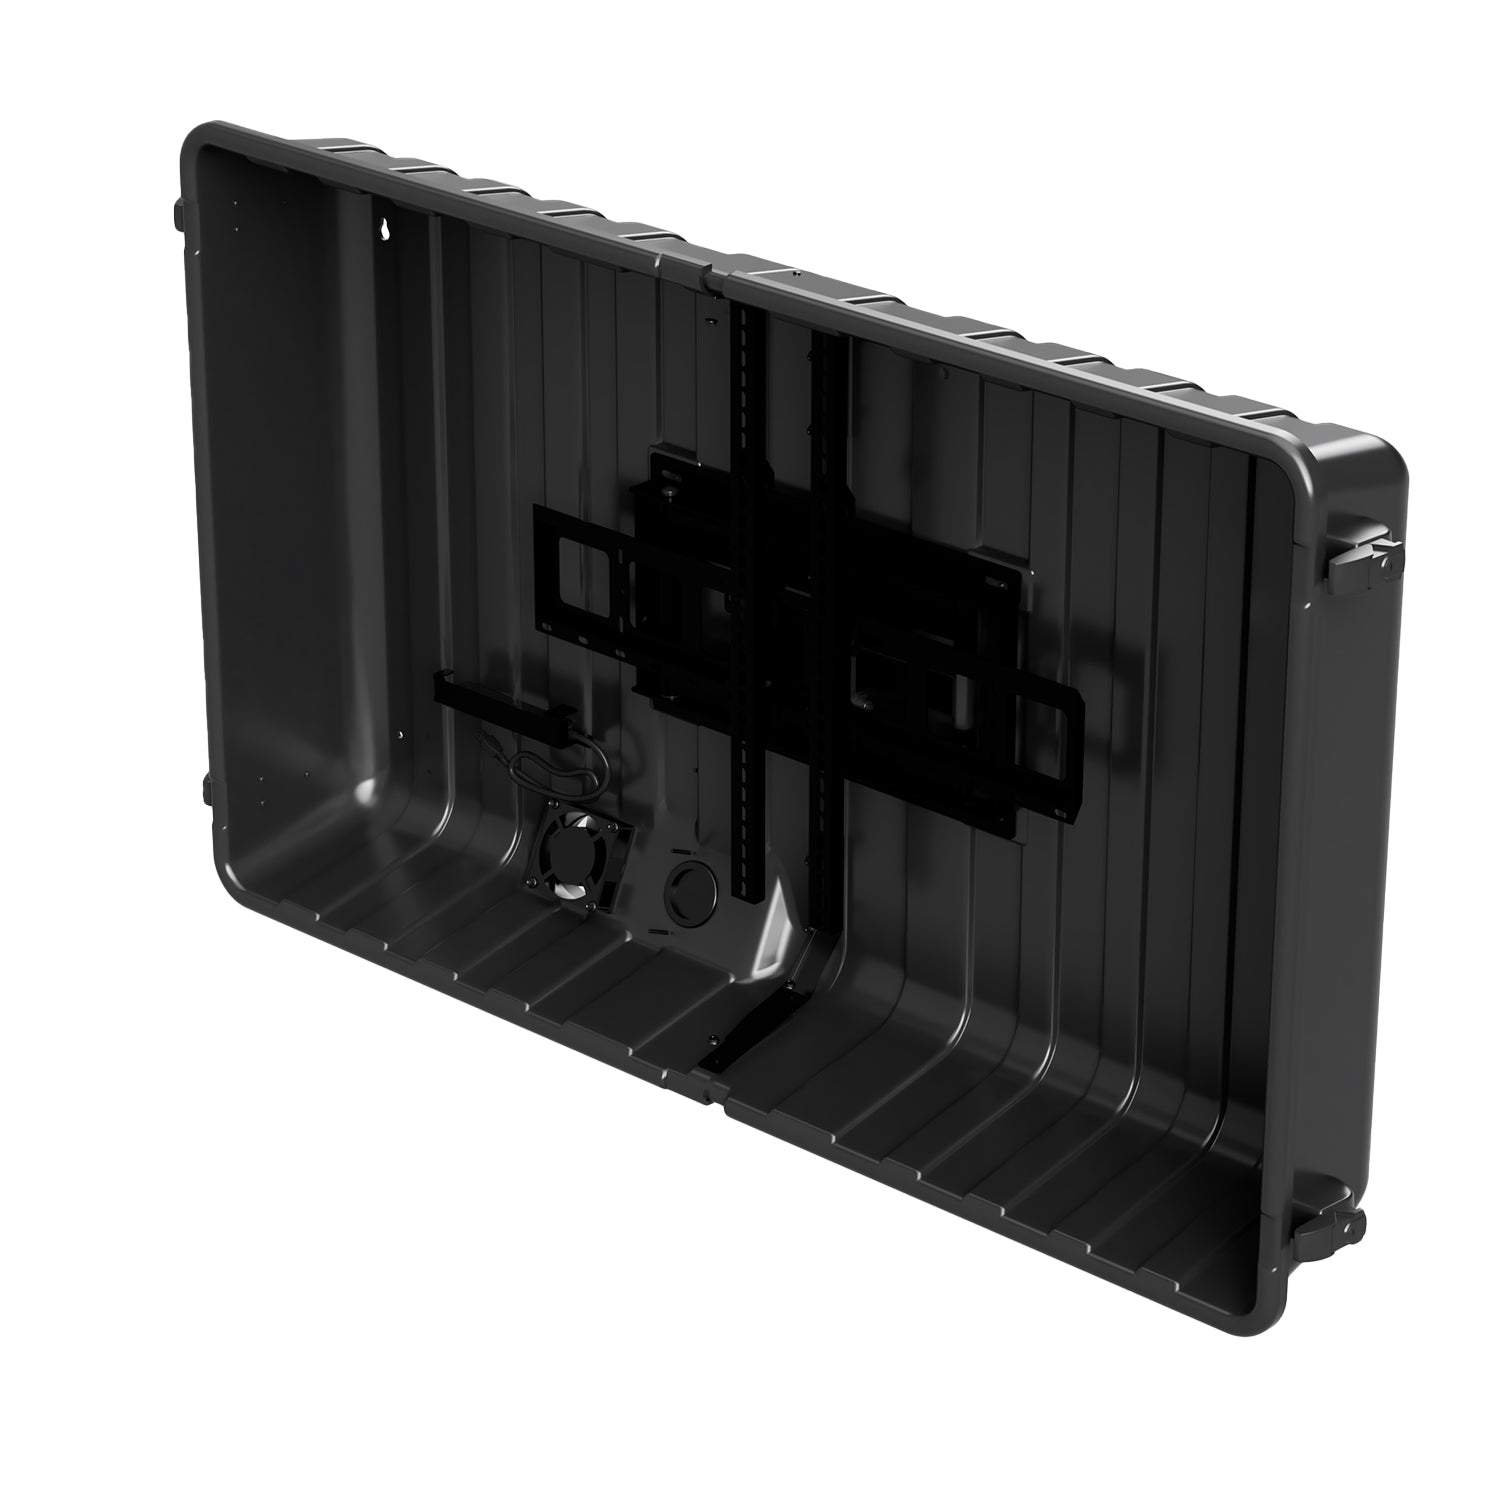 Storm Shell Outdoor Weatherproof TV Enclosure with ariticulating arm and mounting hardware. Fits up to 55" TV view from top with front cover removed